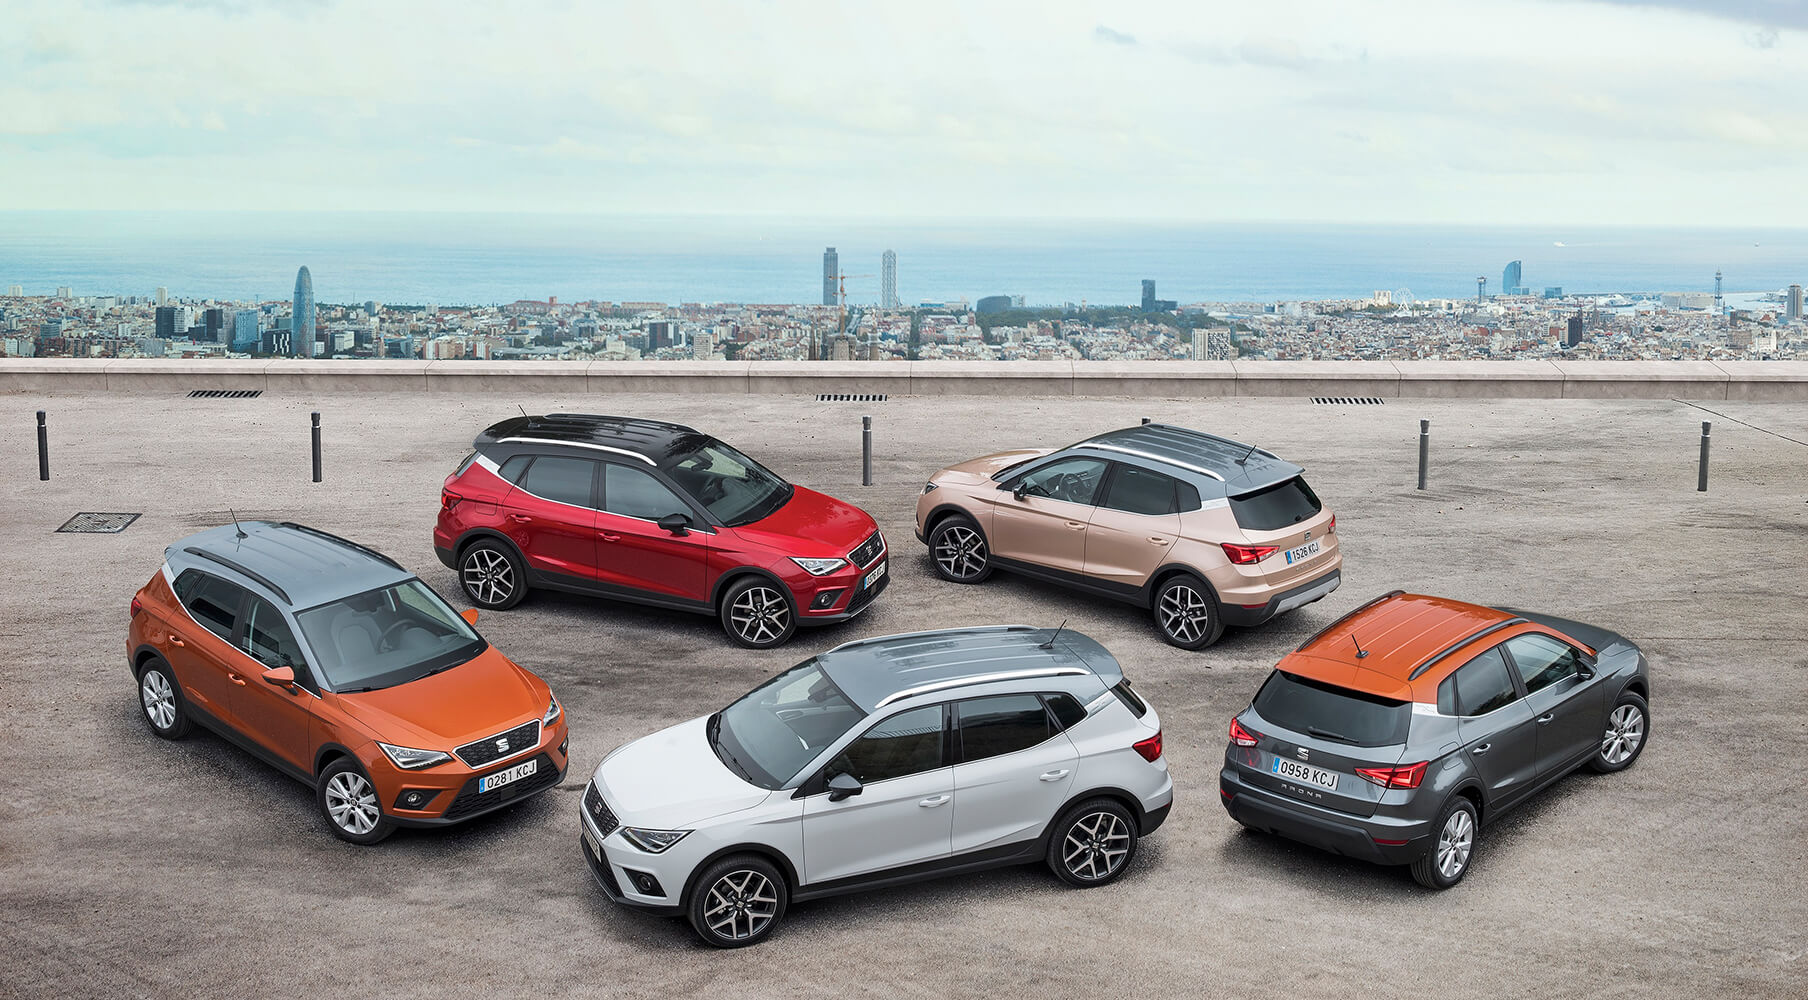 Five SEAT Arona parked with a Barcelona landscape behind